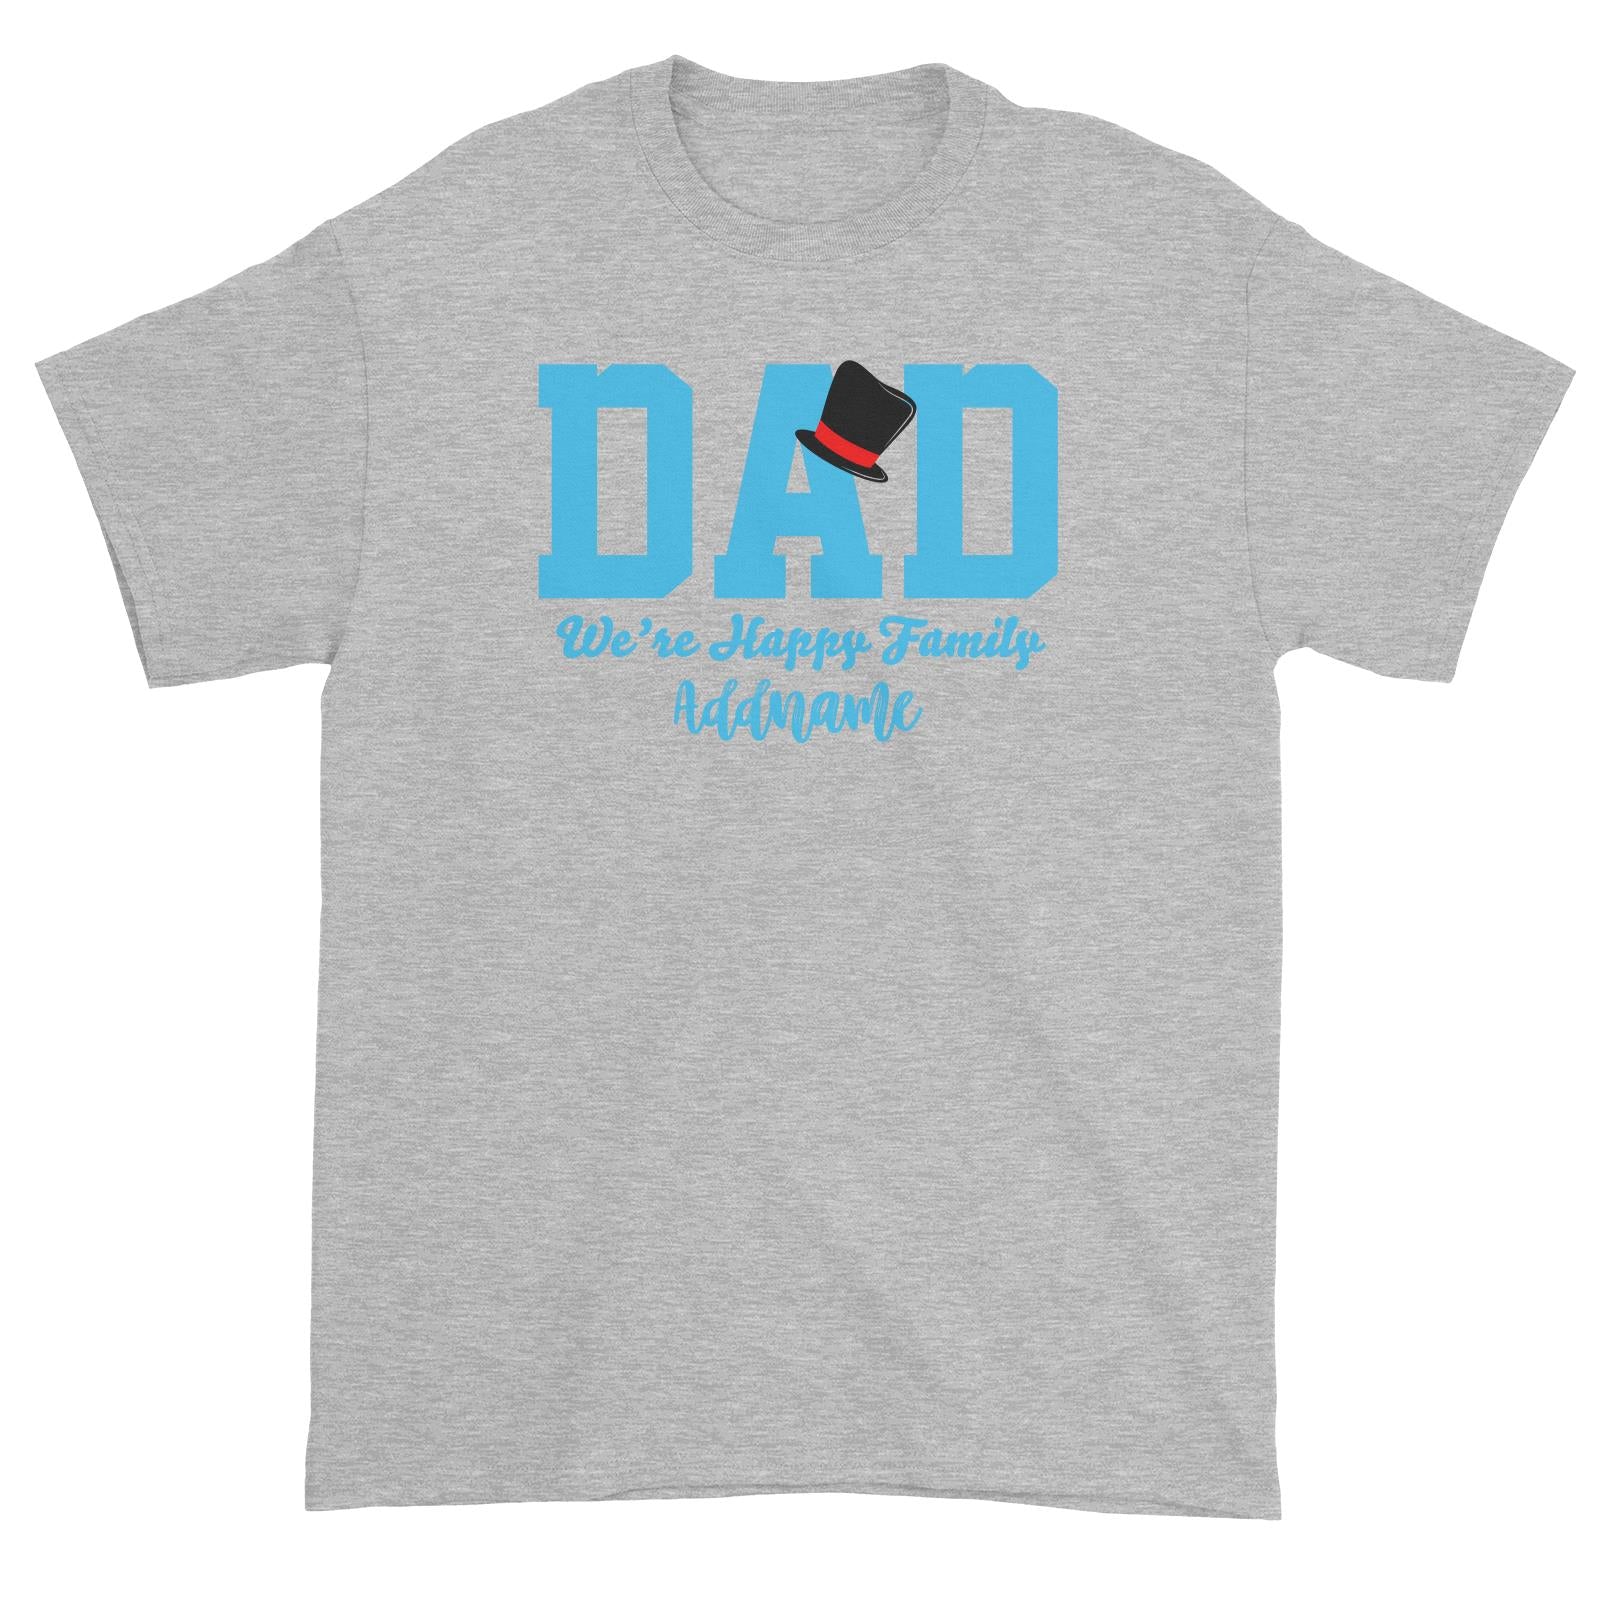 Dad We Are Happy Family Unisex T-Shirt